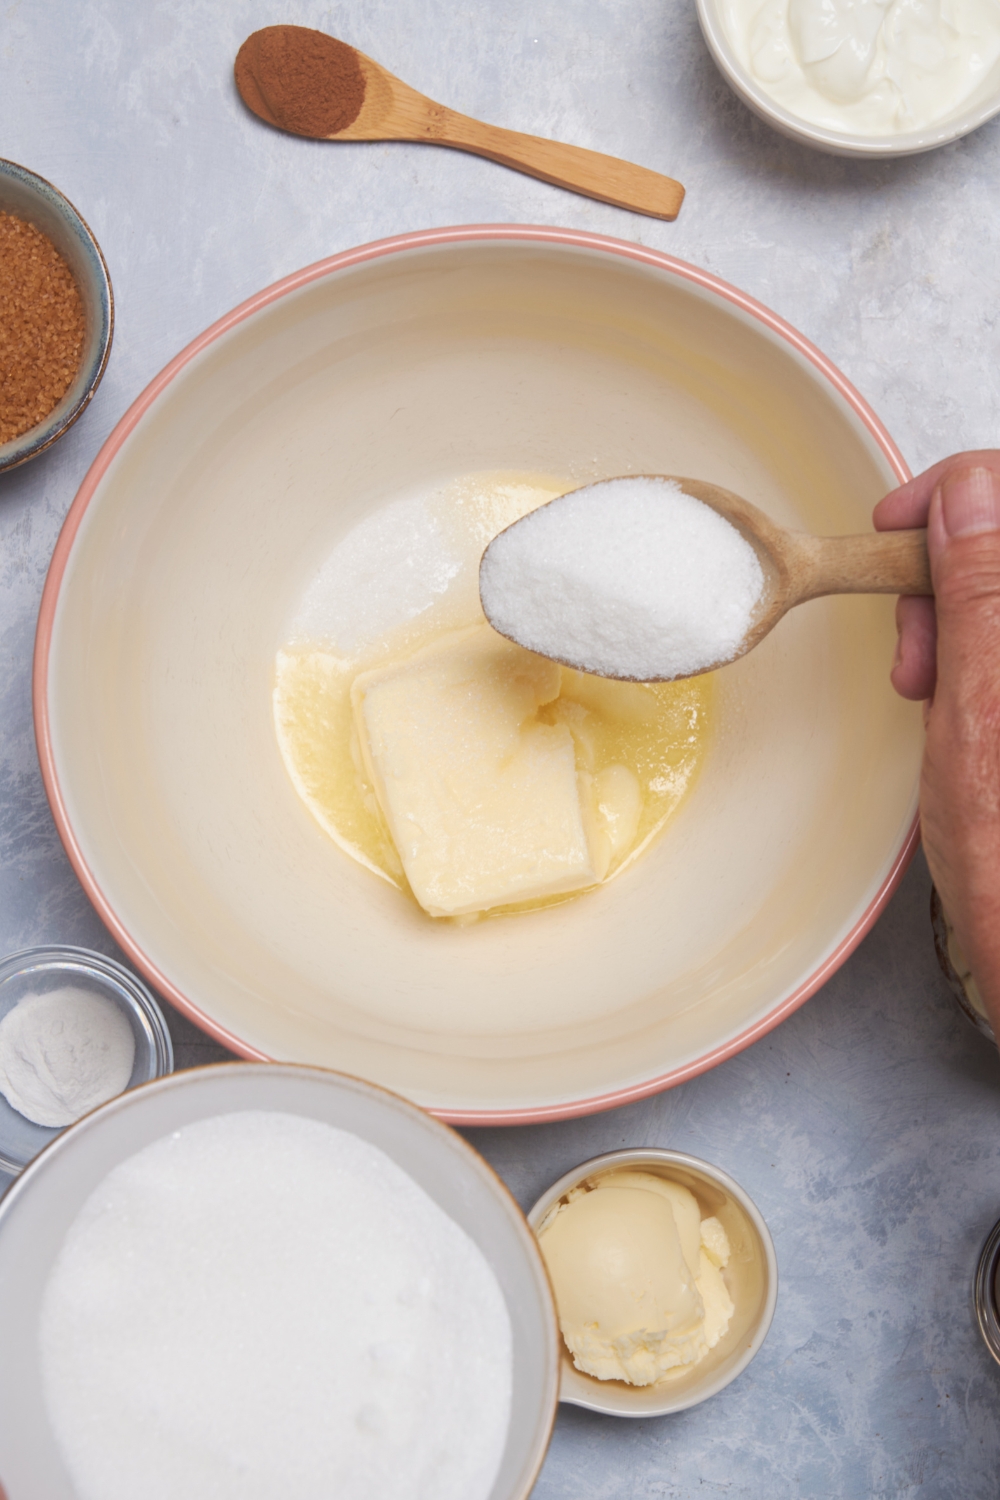 butter and a spoonful of sugar in a white mixing bowl